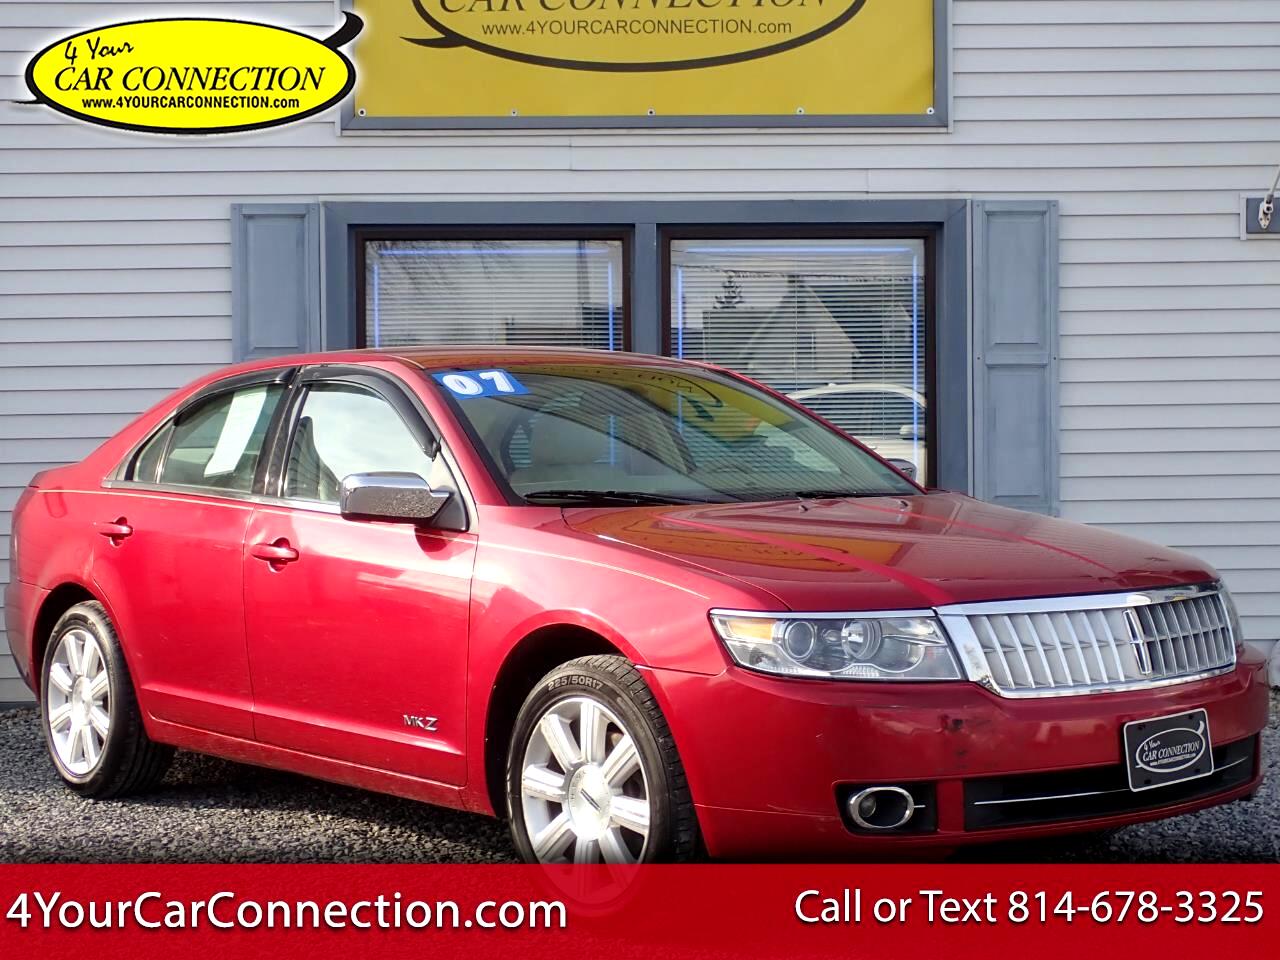 Used 2007 Lincoln Mkz Awd For Sale In Cranberry Pa 16319 4 Your